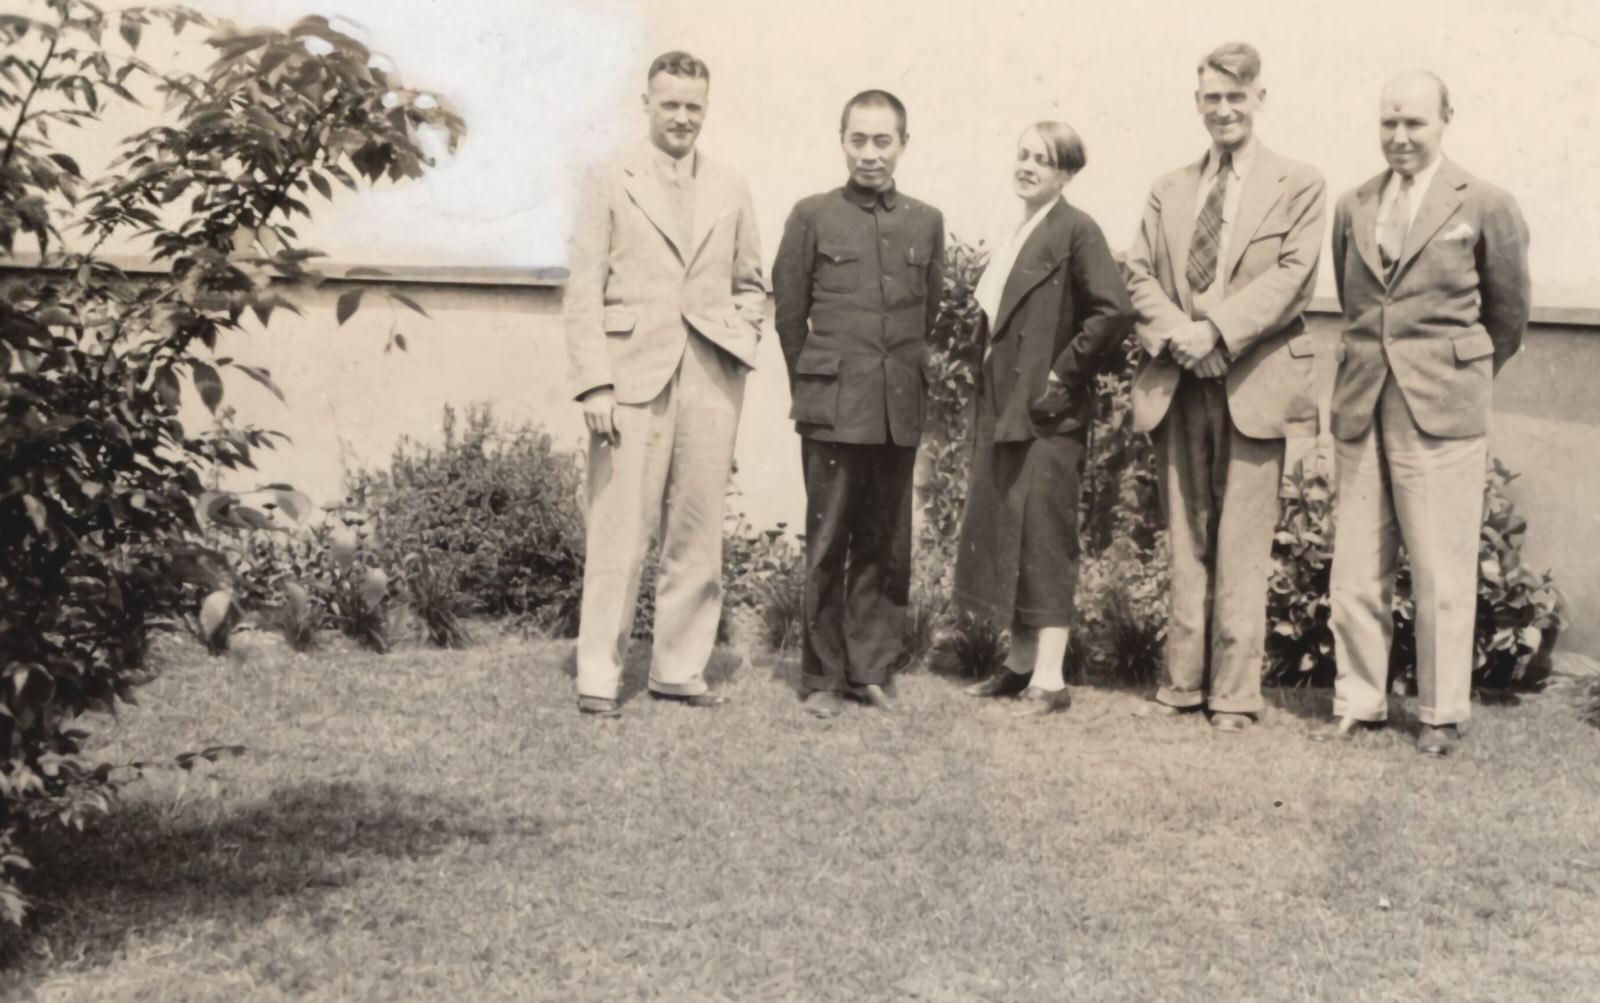 My friends of Hankow Days: Major Frank Dorn; General Chou En-lai (Zhou Enlai), representing the Chinese Communists in the Chinese Government; Lieutenant Evans F. Carlson; Mr. Robert Jarvis, American Consular official. Agnes Smedley is in the center. 1937-1940